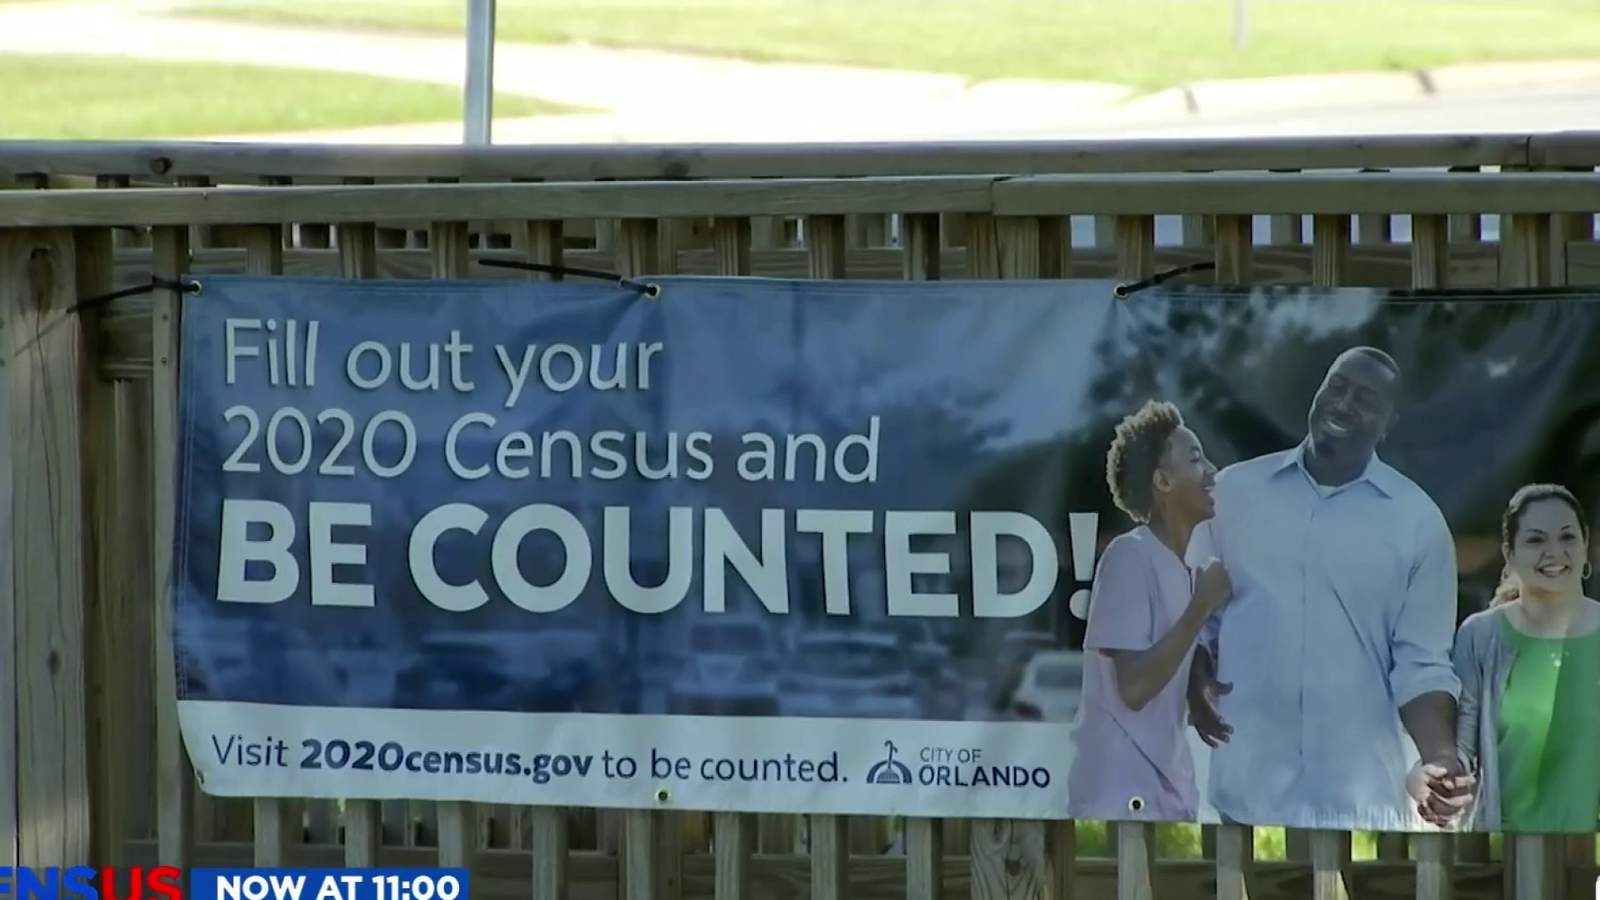 ‘We just need to be counted:’ Orlando commissioner ramping up census response efforts as deadline approaches